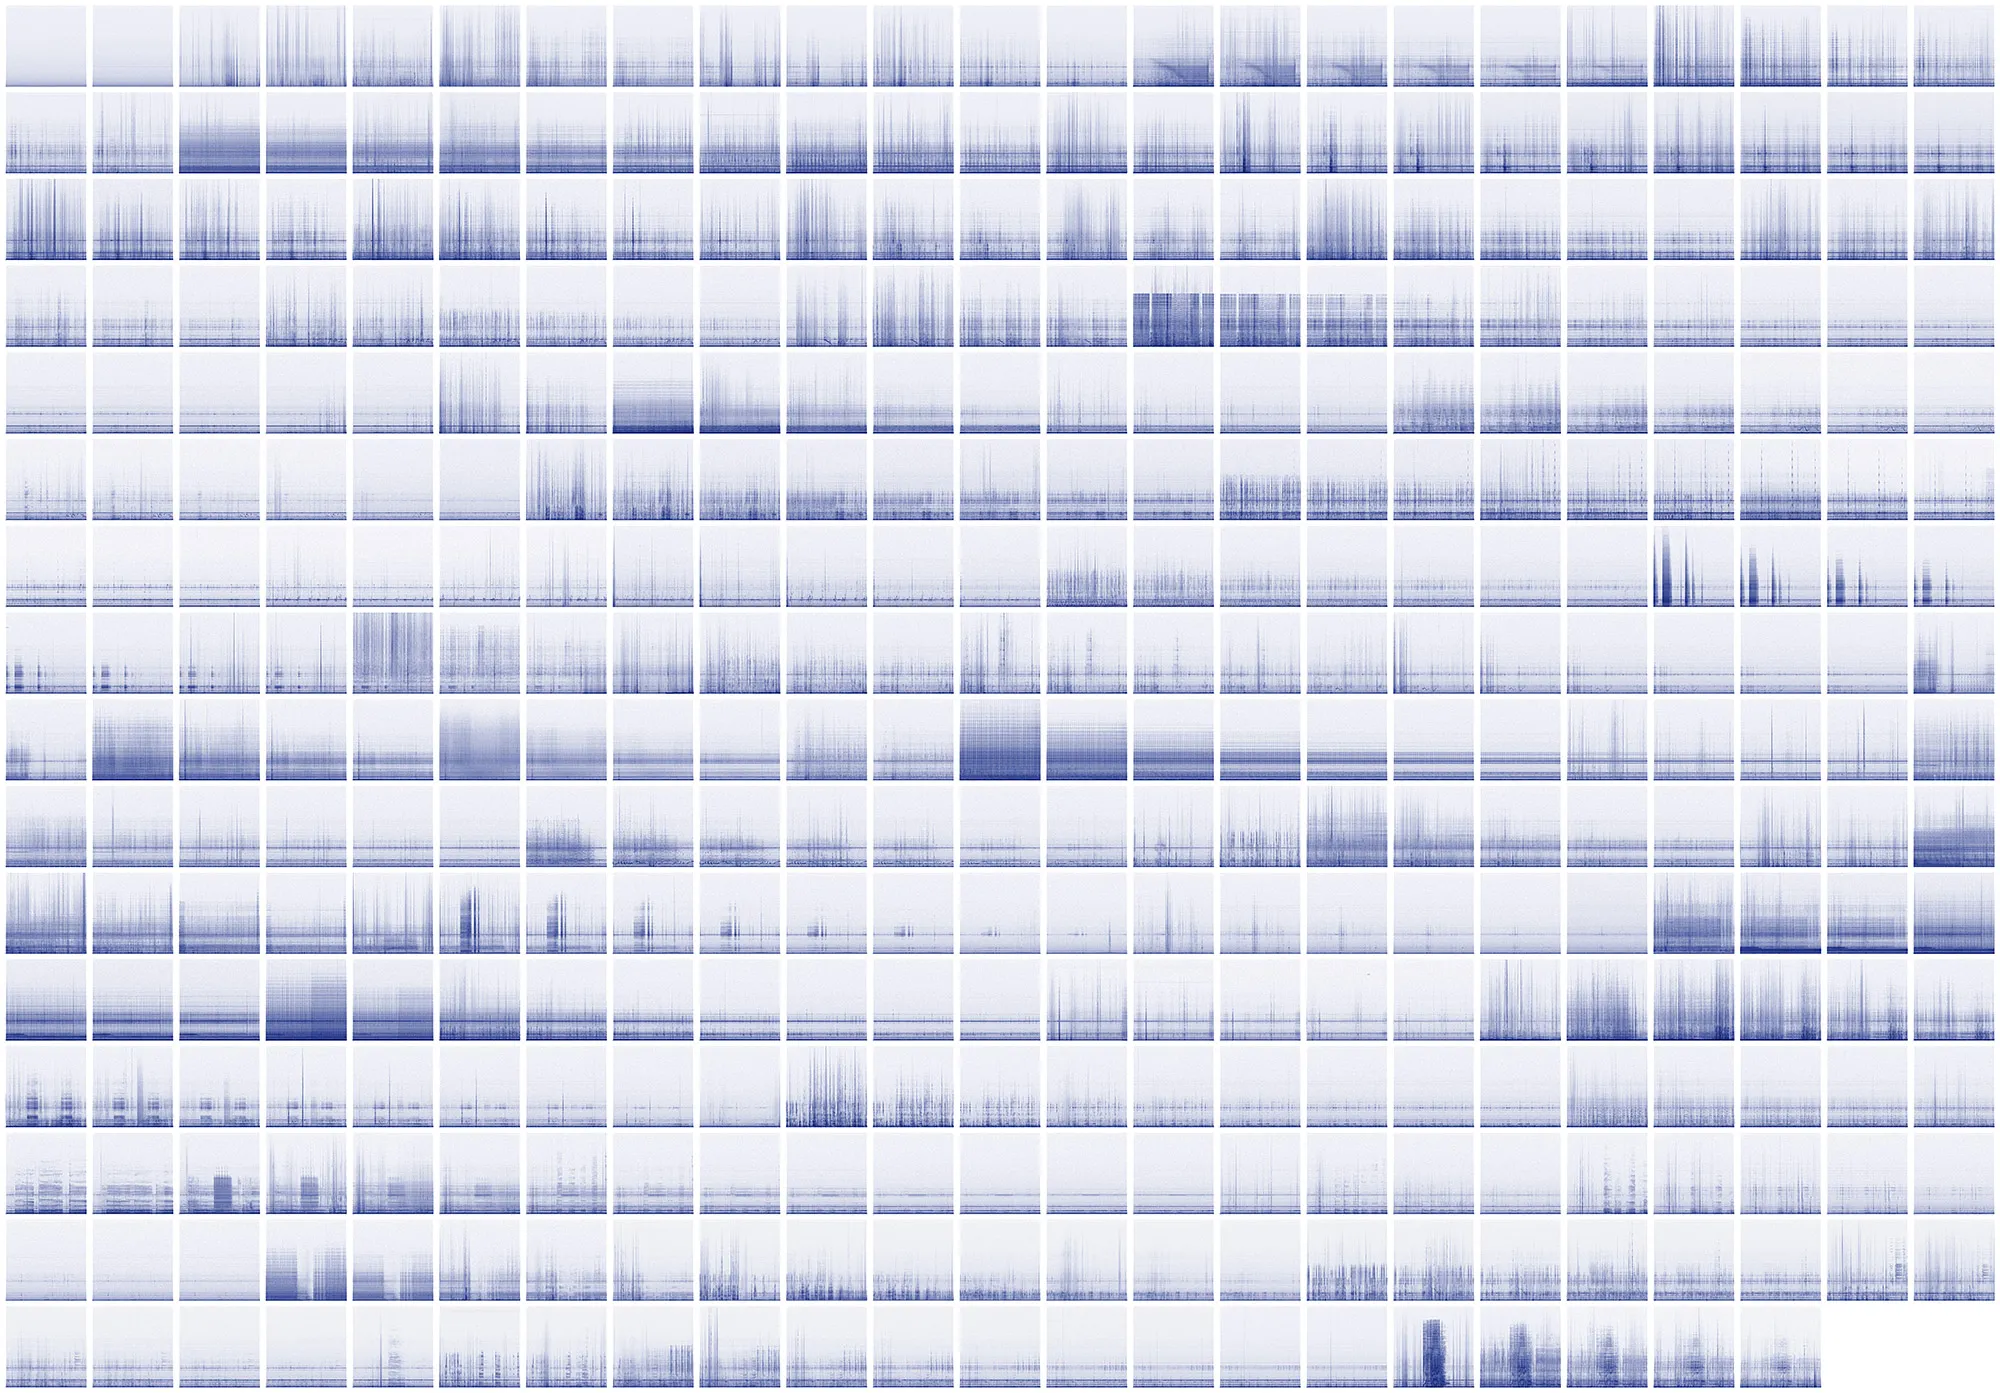 Minute/Year — Spectrograms, 2016, Day 1 — Day 366